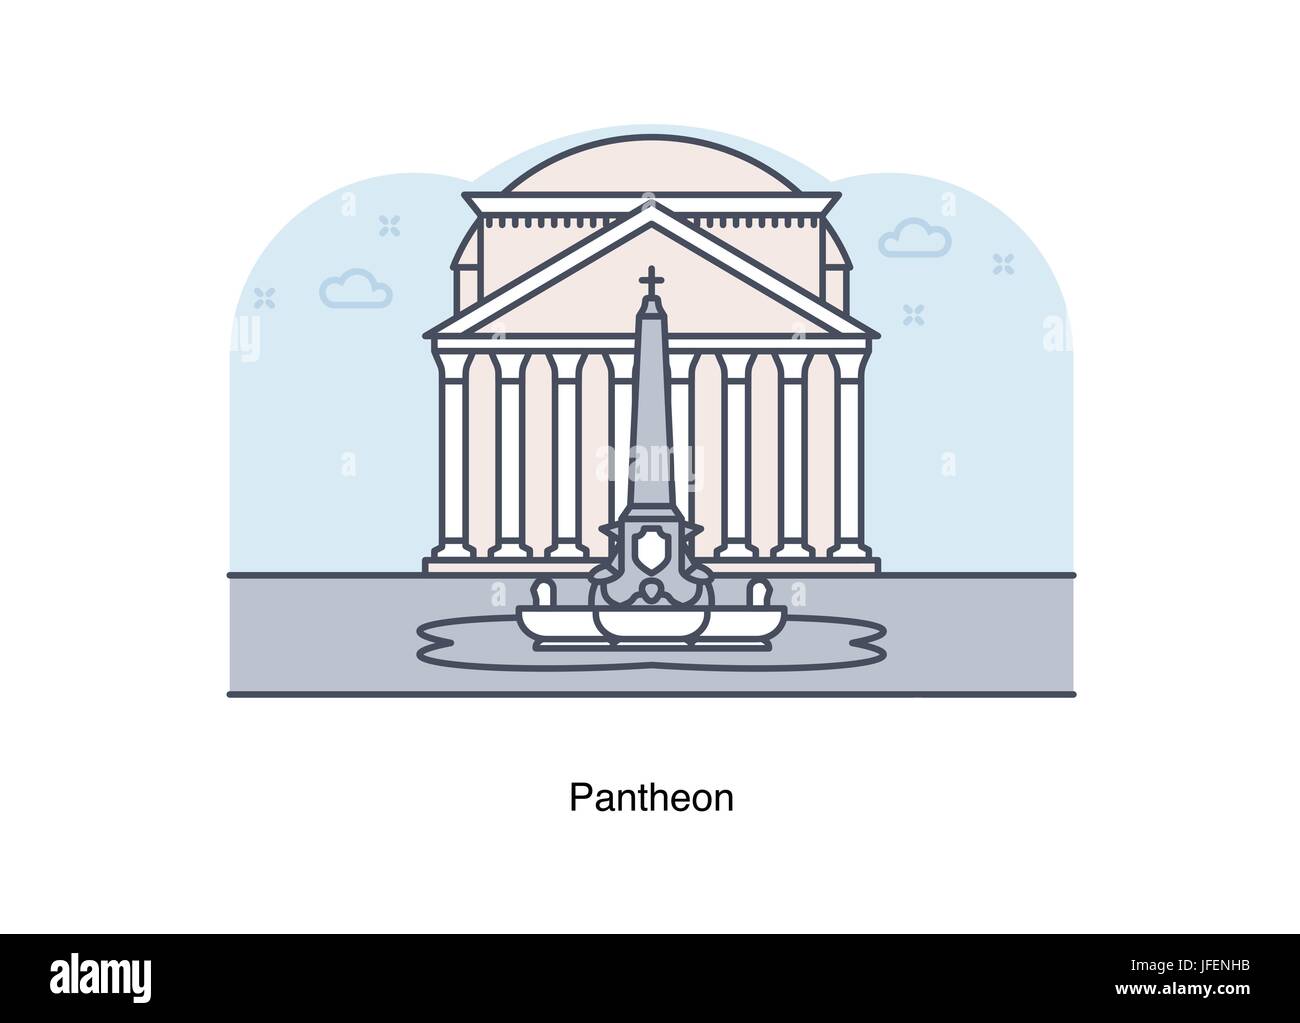 Vector line illustration of Pantheon, Rome, Italy. Stock Vector